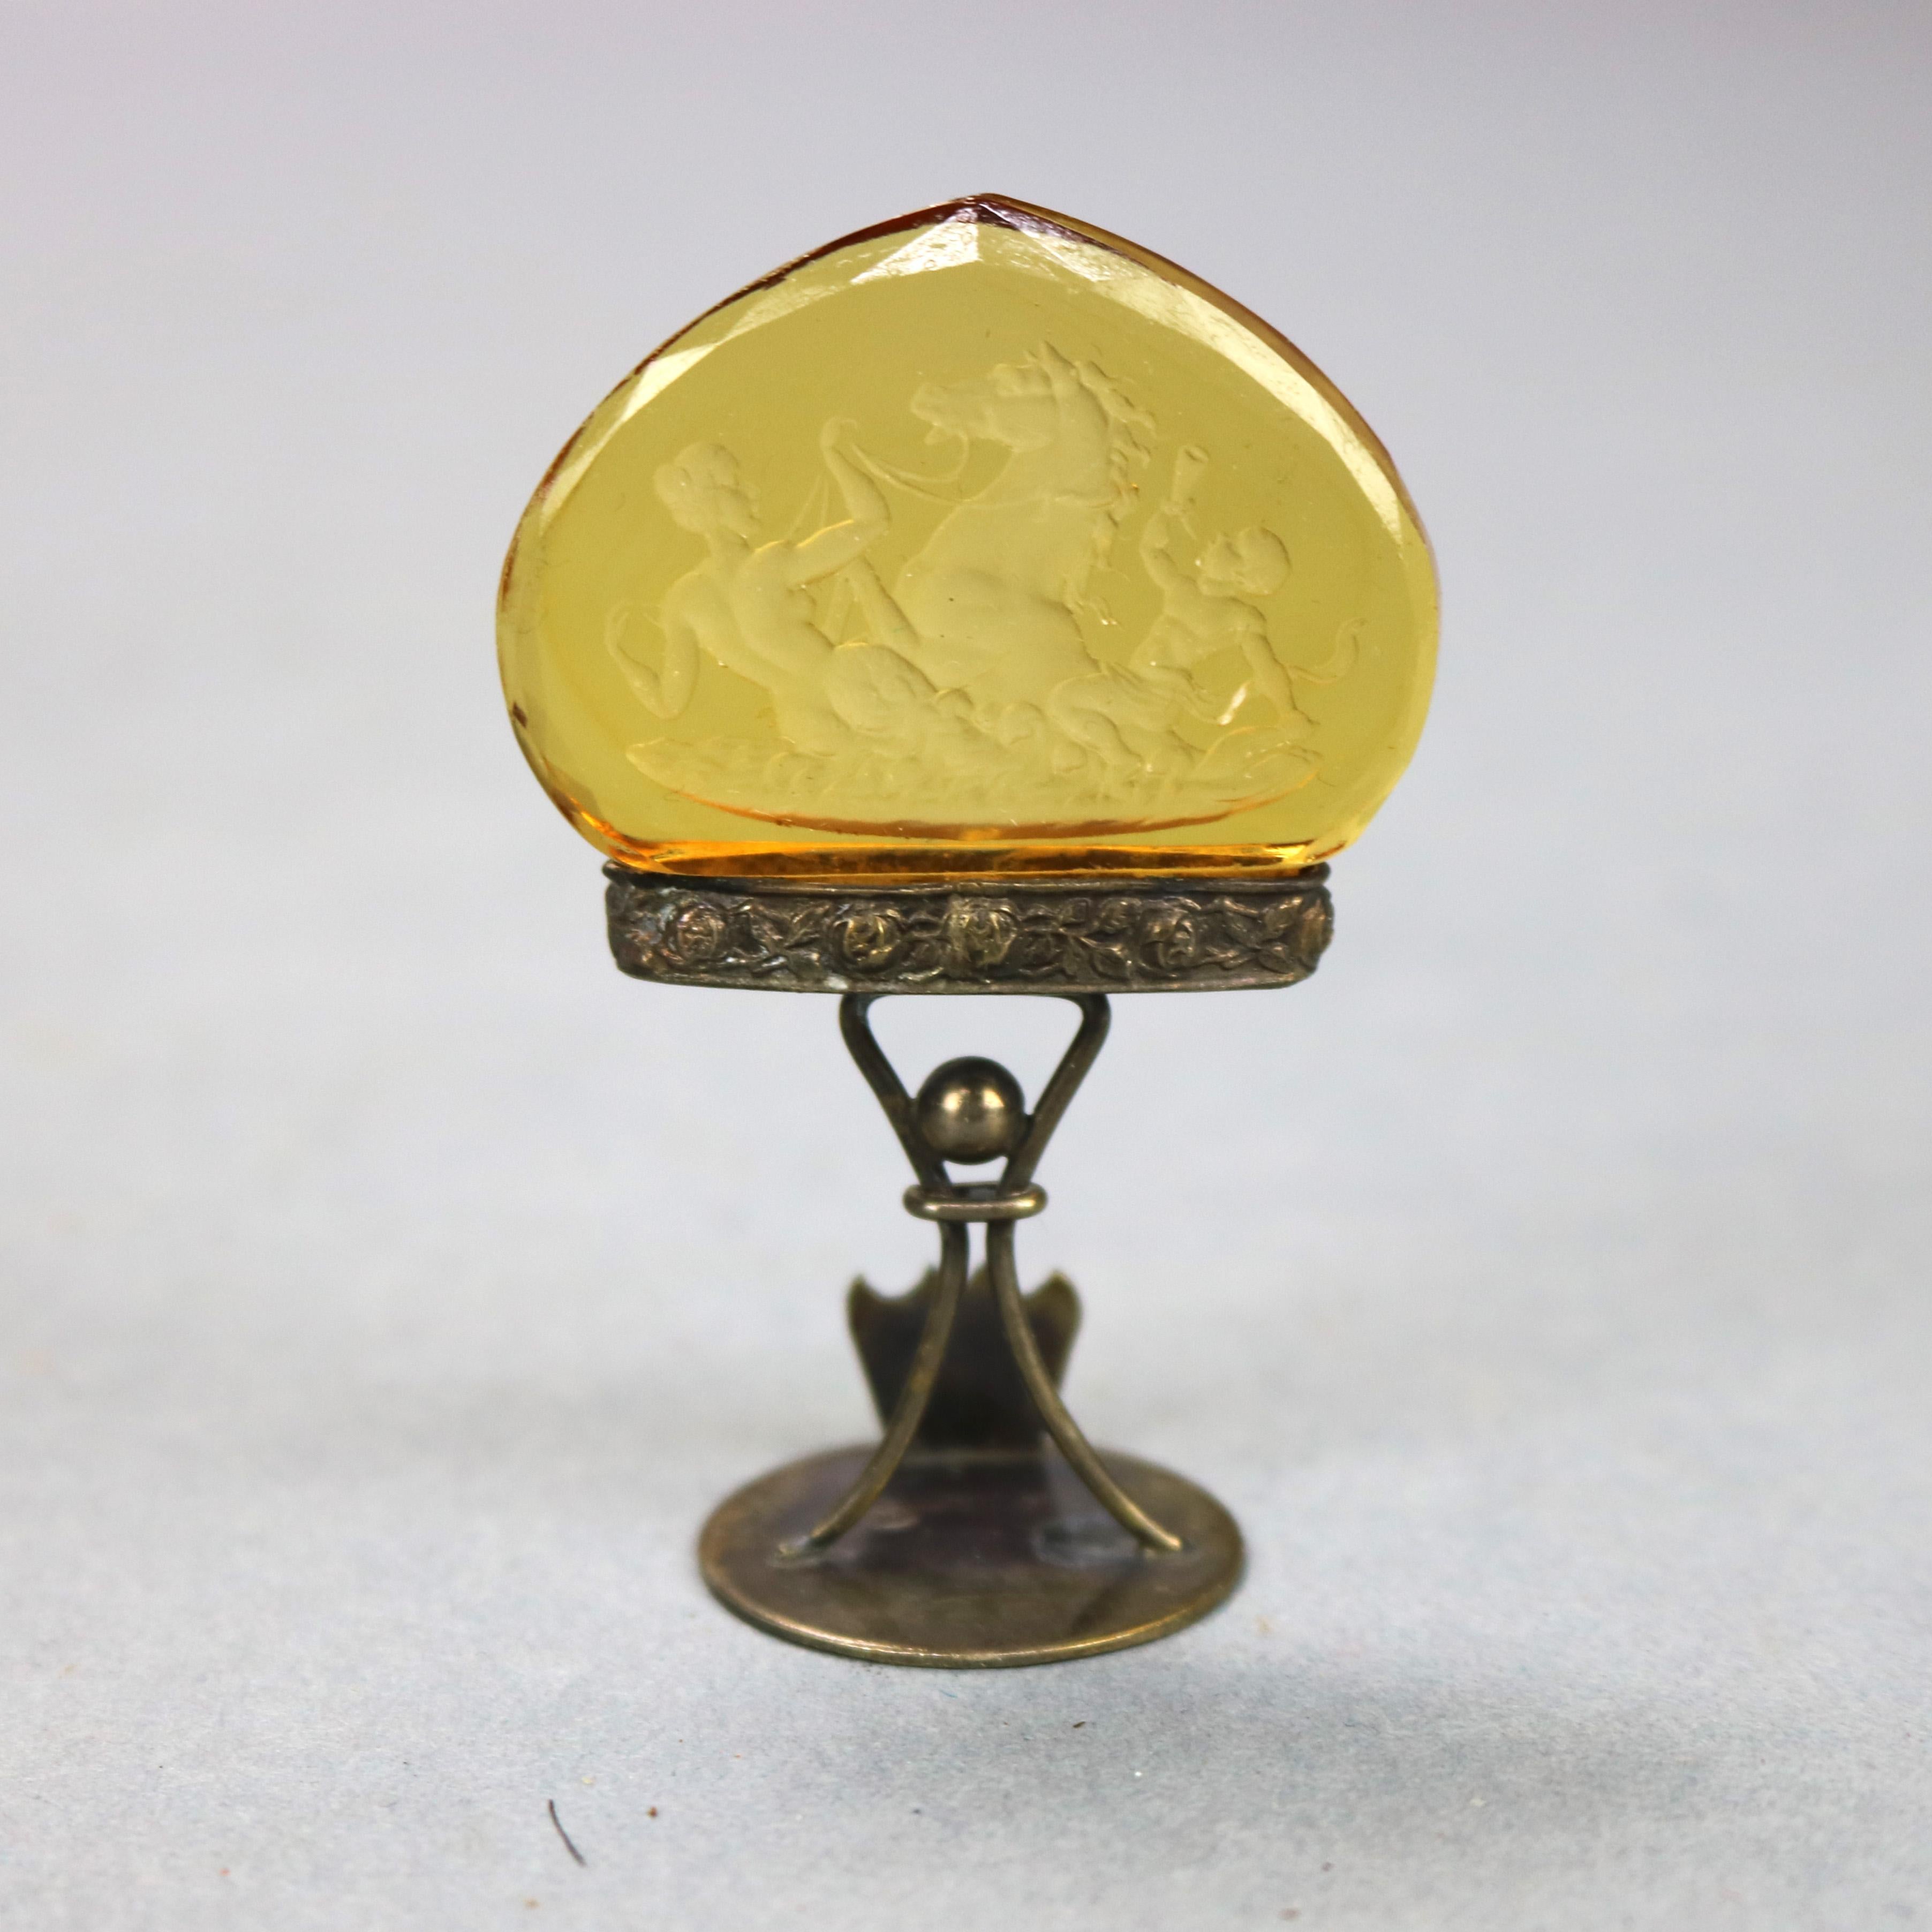 An antique set of twelve place card holders offer amber glass finials having Grecian scenes raised on figural sterling silver base with stylized man on round base, made in Austria stamped on base, 19th century
Set of sterling & crystal place card